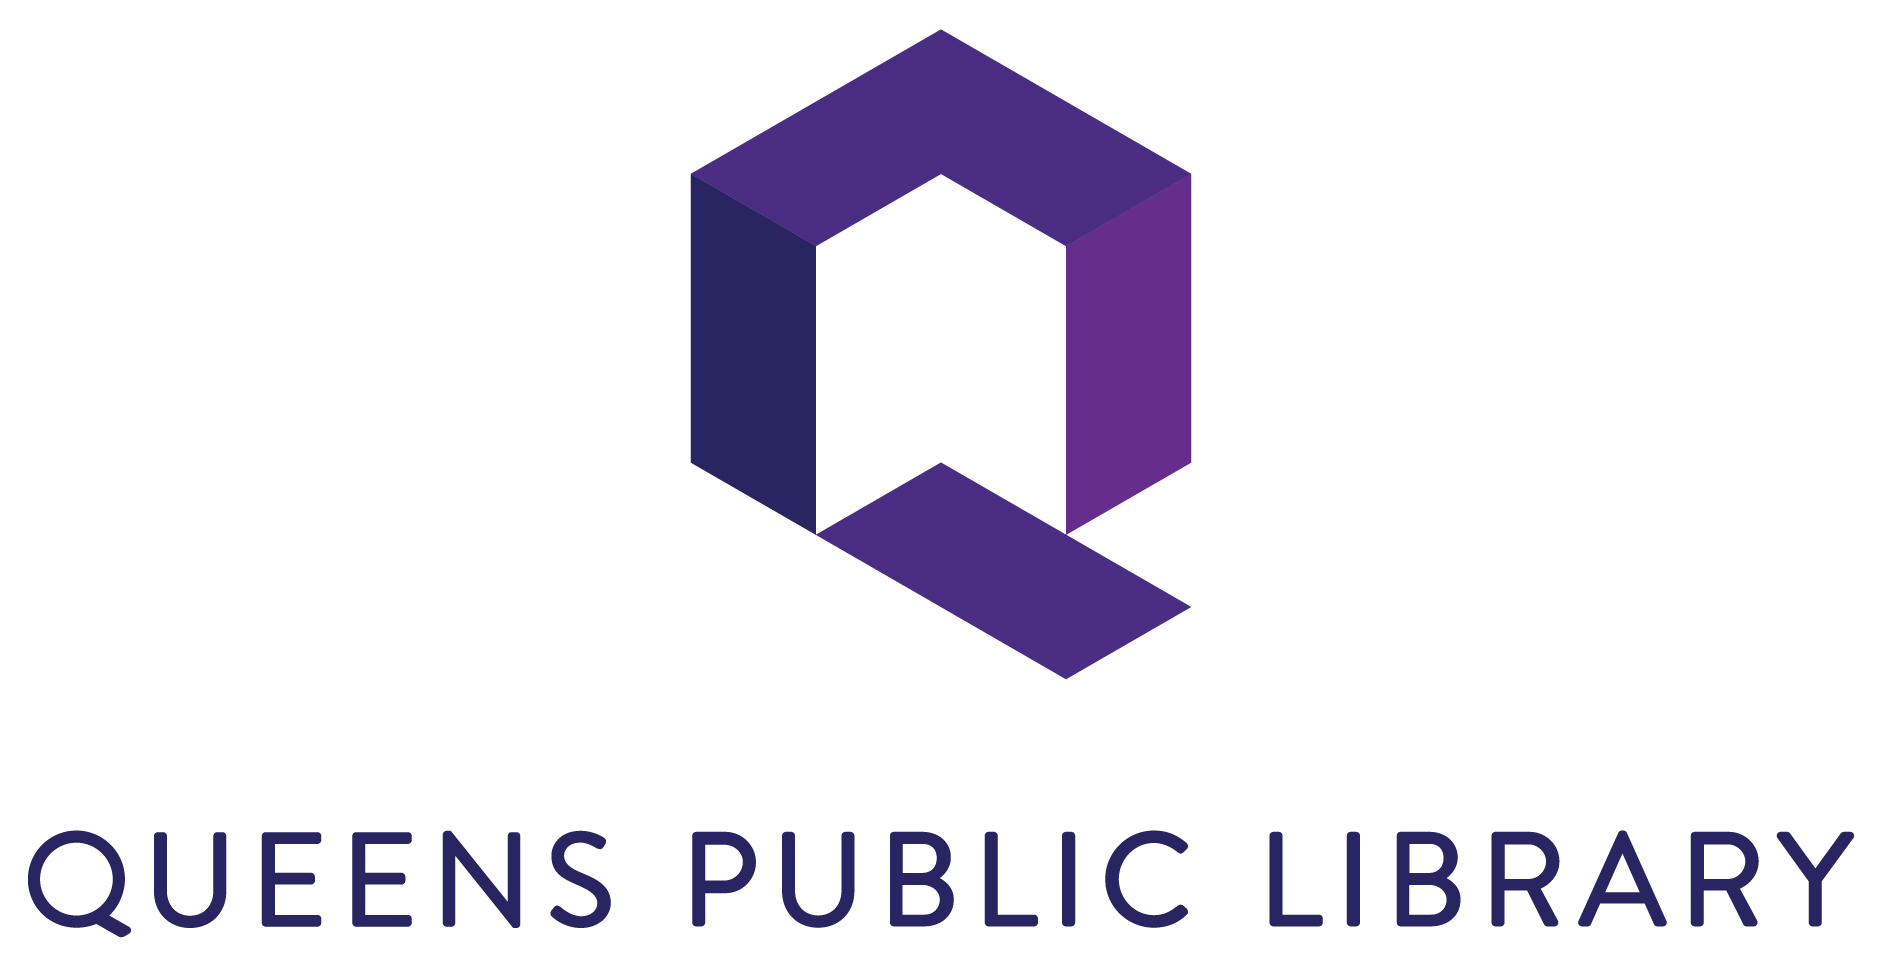 The Queens Public Library logo in purple with a white background.